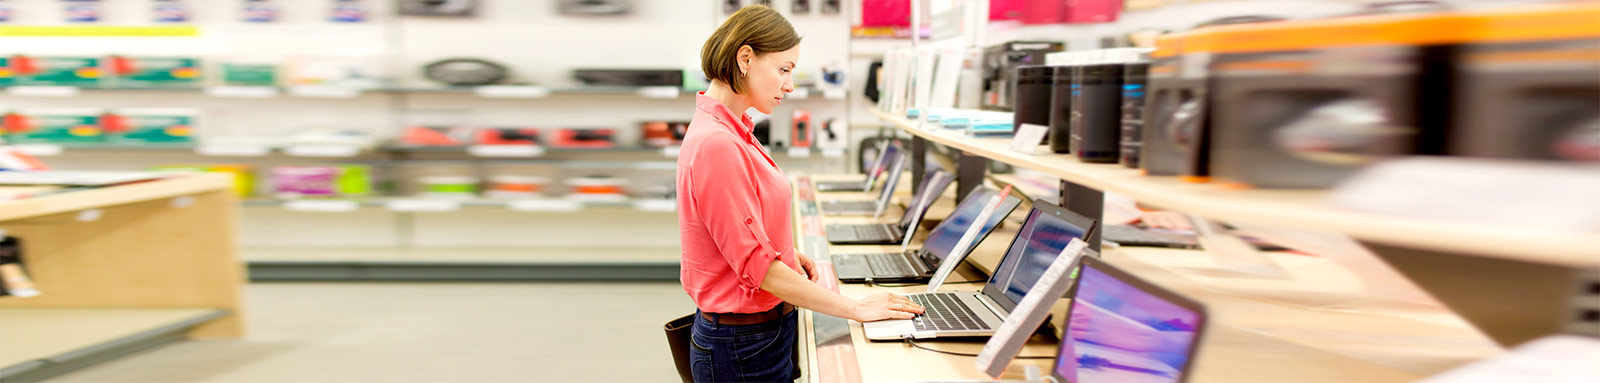 Woman using laptop at a store